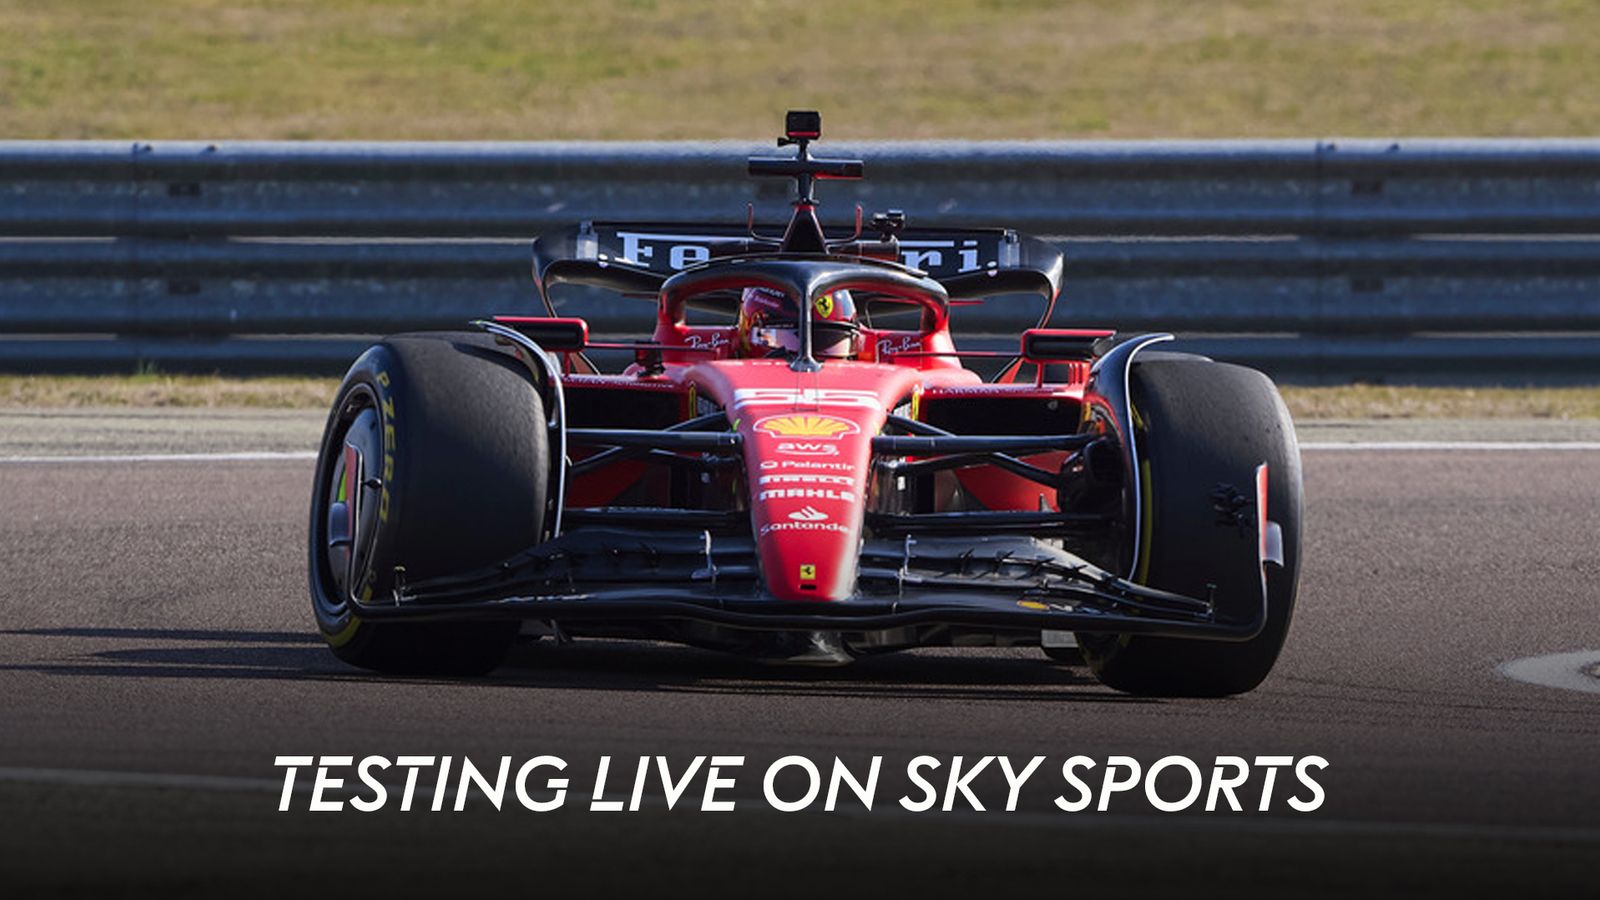 Formula 1 pre-season testing 2023: Everything you need to know ahead of live Sky Sports coverage from Bahrain | F1 News